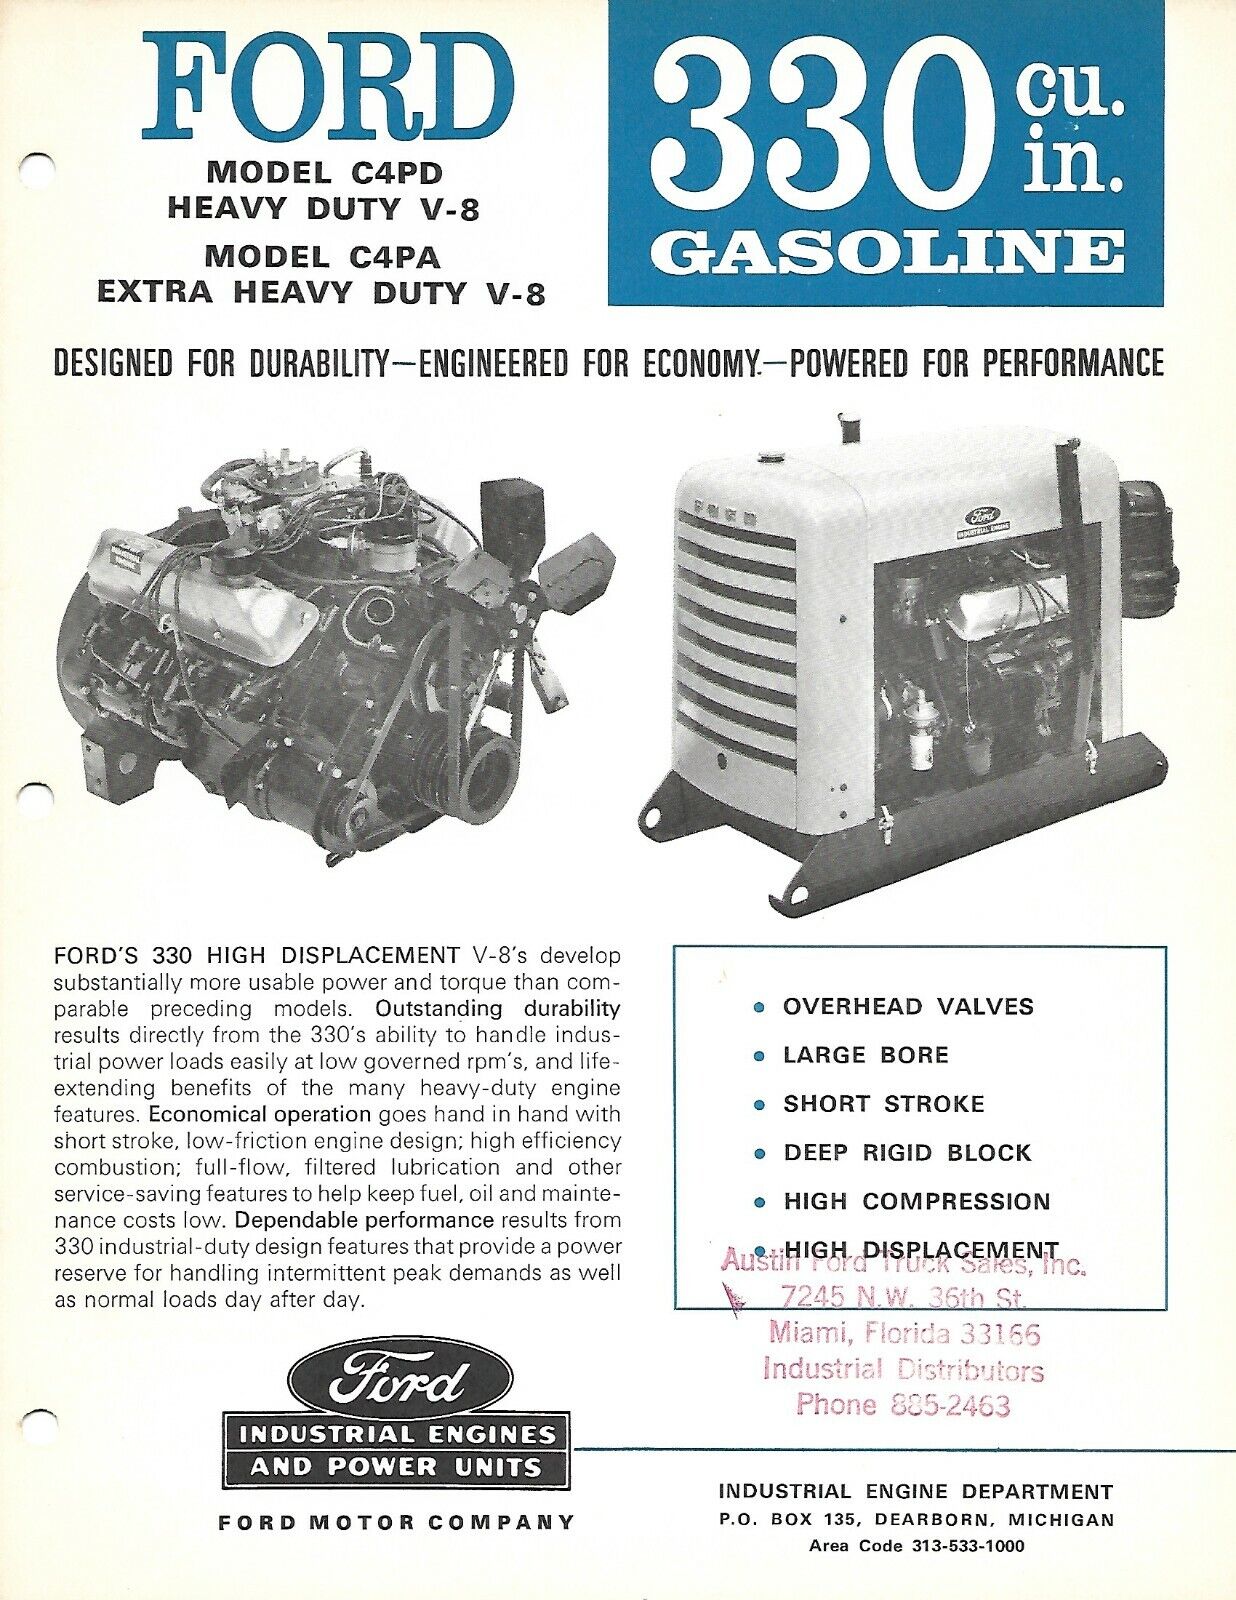 Equipment Brochure - Ford - C4PD C4PA 330 Gas Industrial Engine - c1965 (E7157)